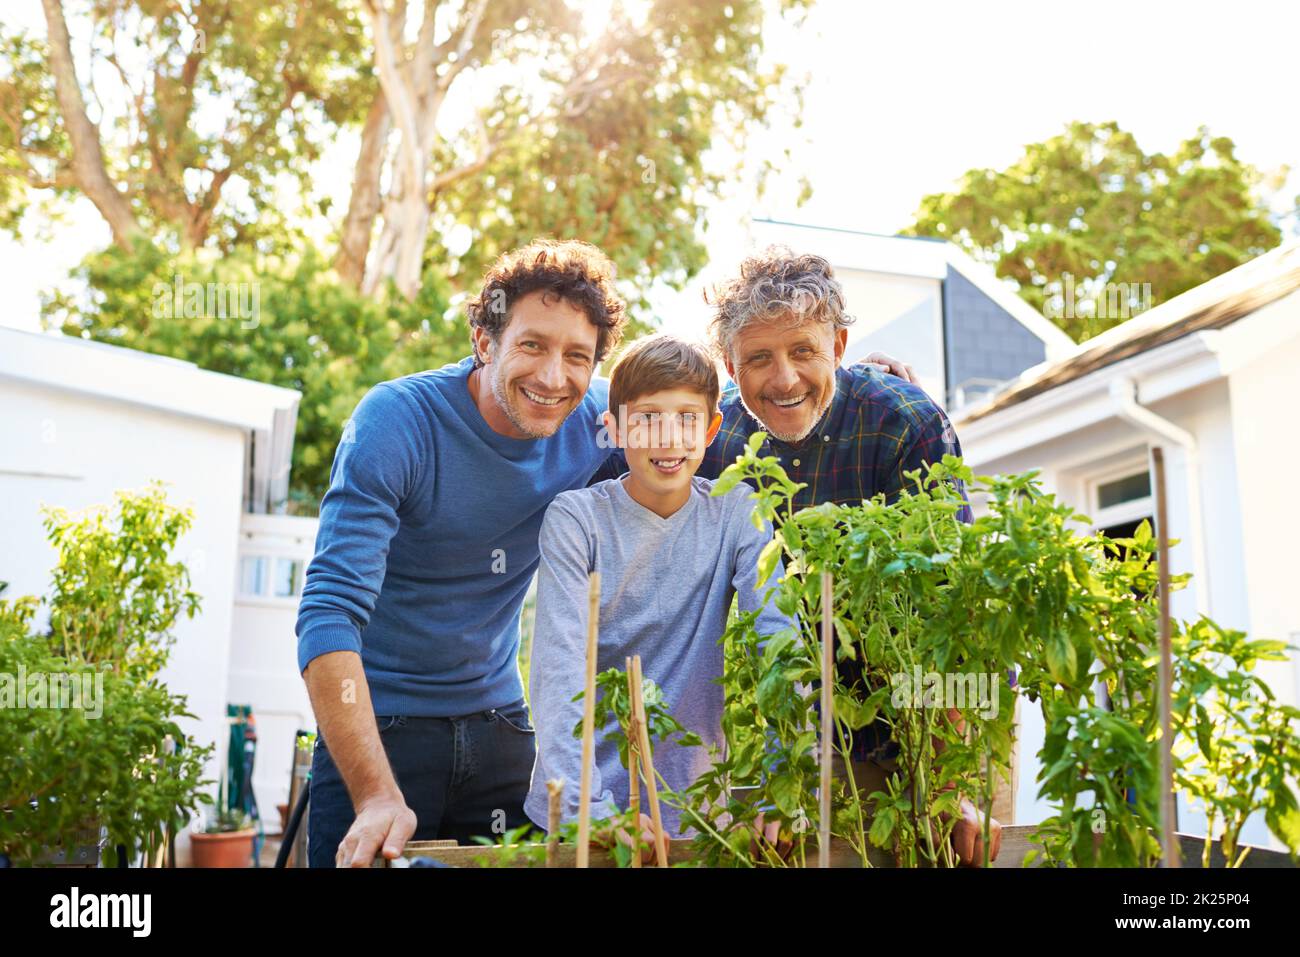 Three generations of gardeners. Portrait of a young boy gardening with his father and grandfather. Stock Photo